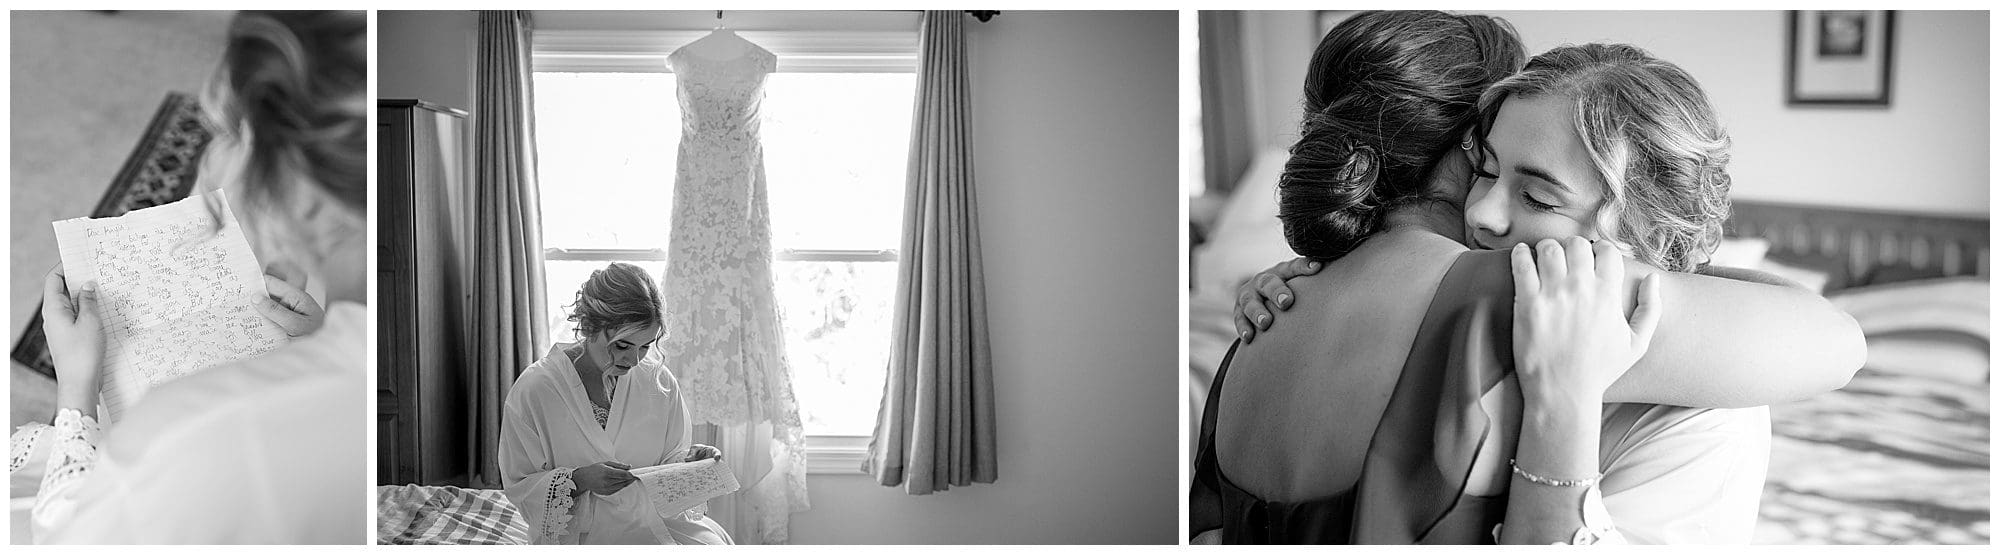 A triptych of black and white photos showing a bride's wedding day preparations: viewing her dress, reading a note, and sharing an emotional hug.